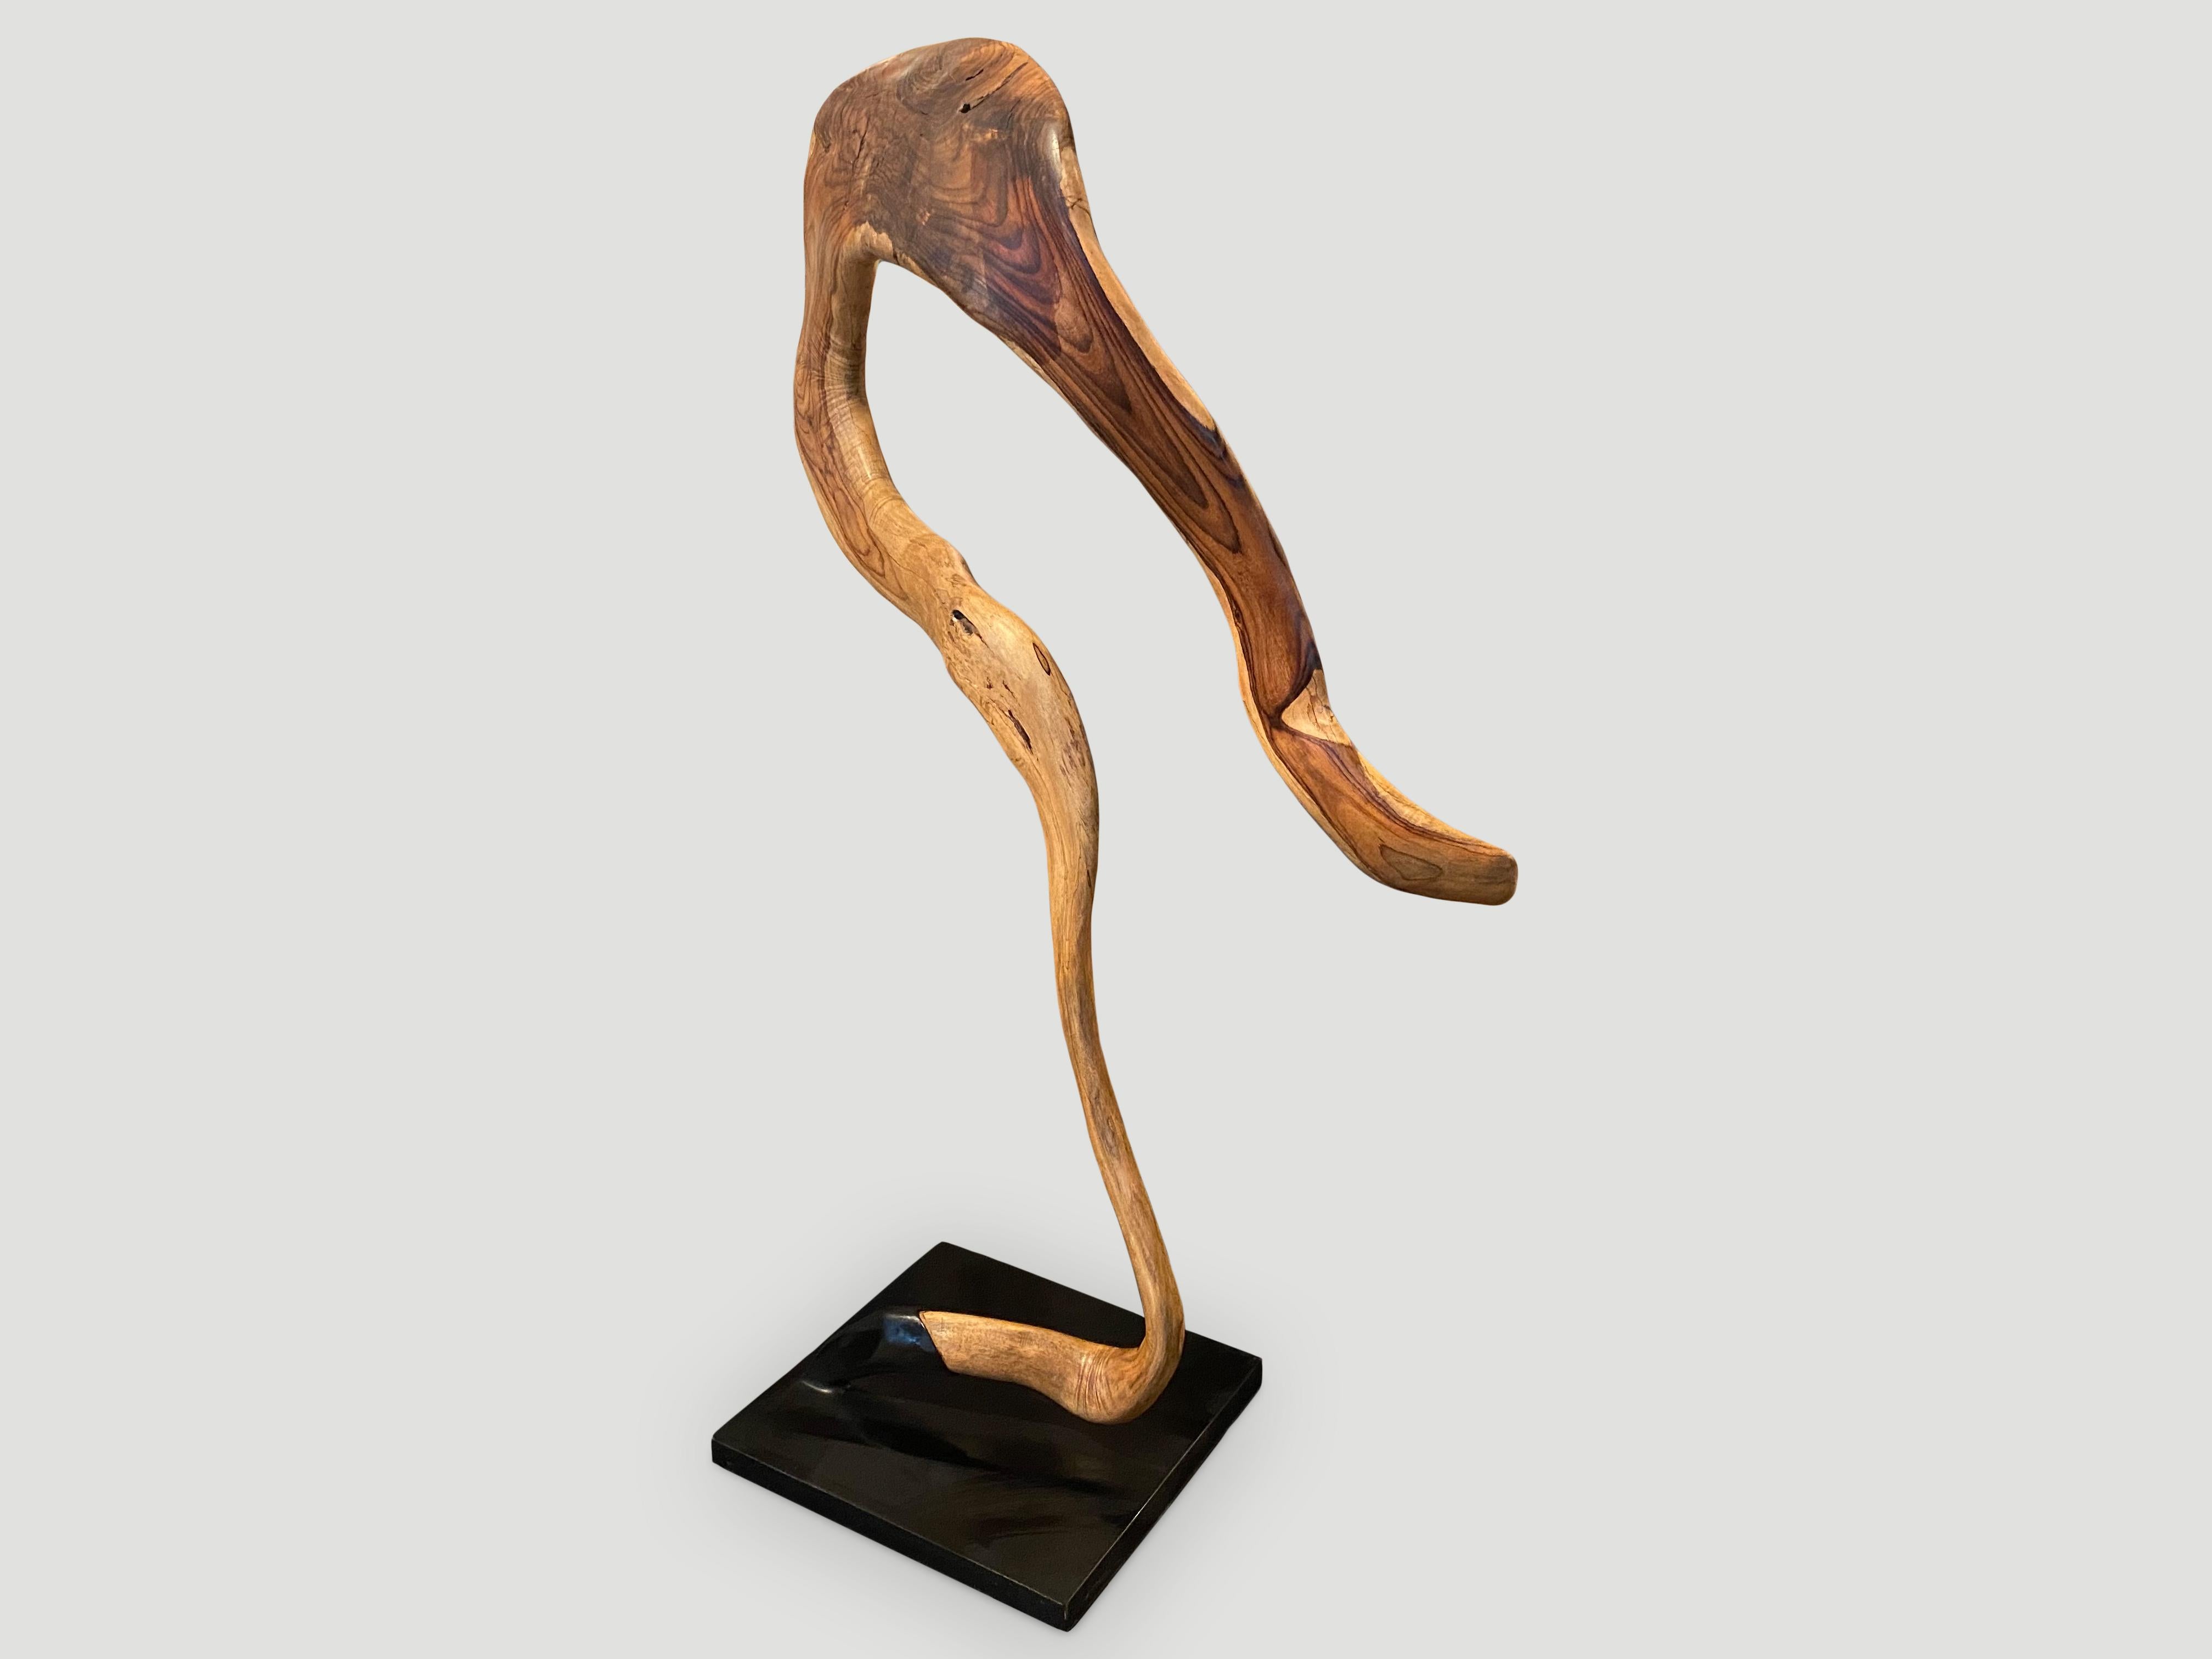 Beautifully carved sculpture made from one piece of reclaimed sono wood resembling a question mark. Finished with a natural oil revealing the beautiful grain in the wood. Set on a 16